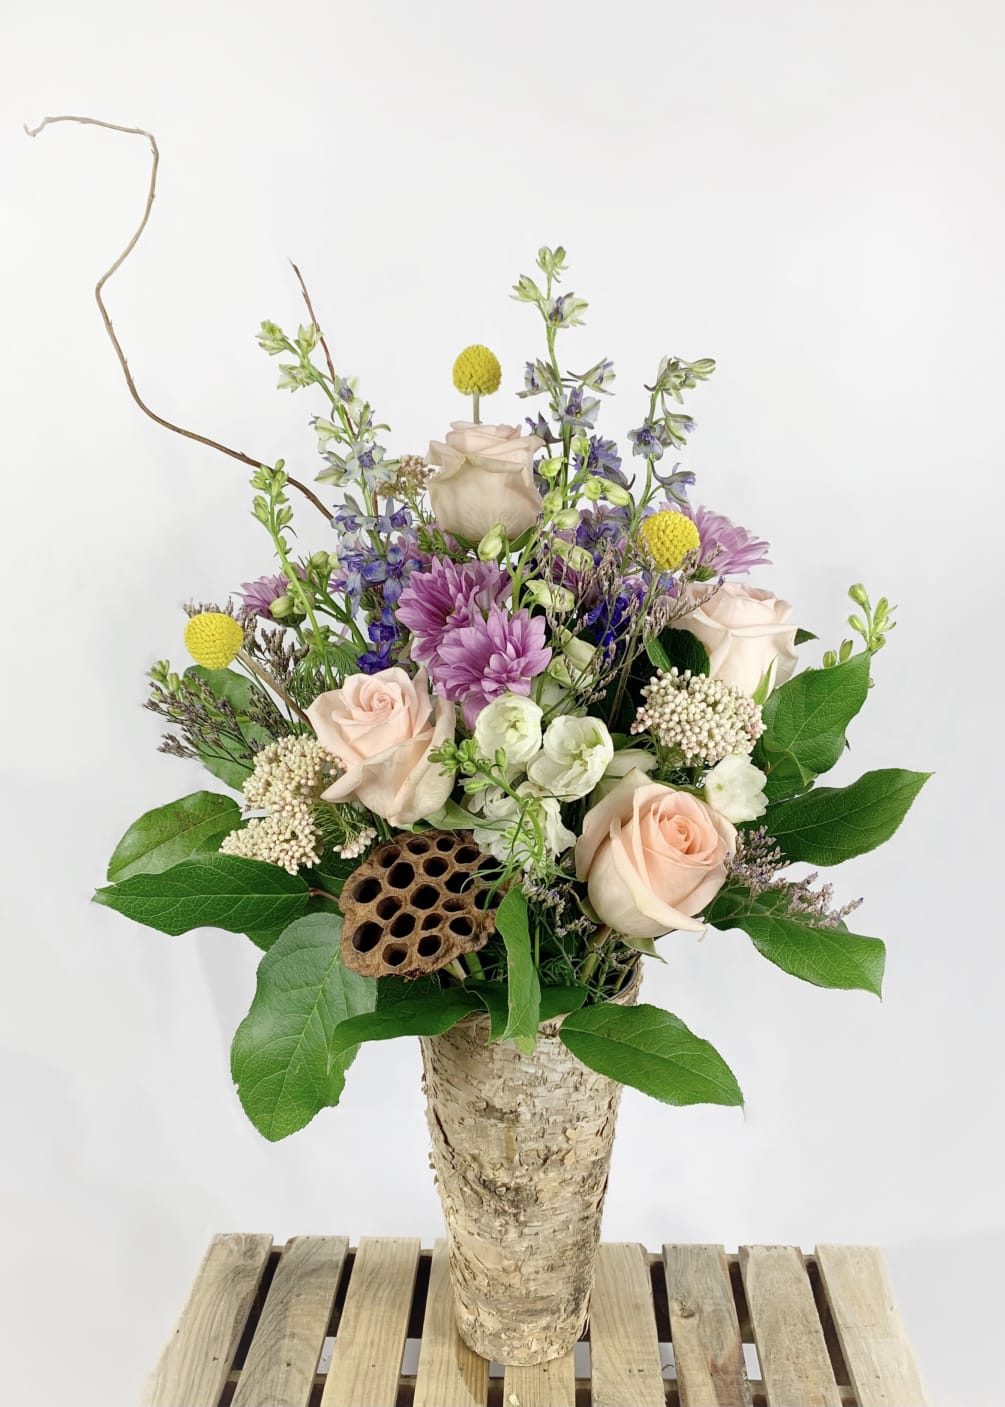 A One-Sided Arrangement. The softest colors of spring in a birch vase!